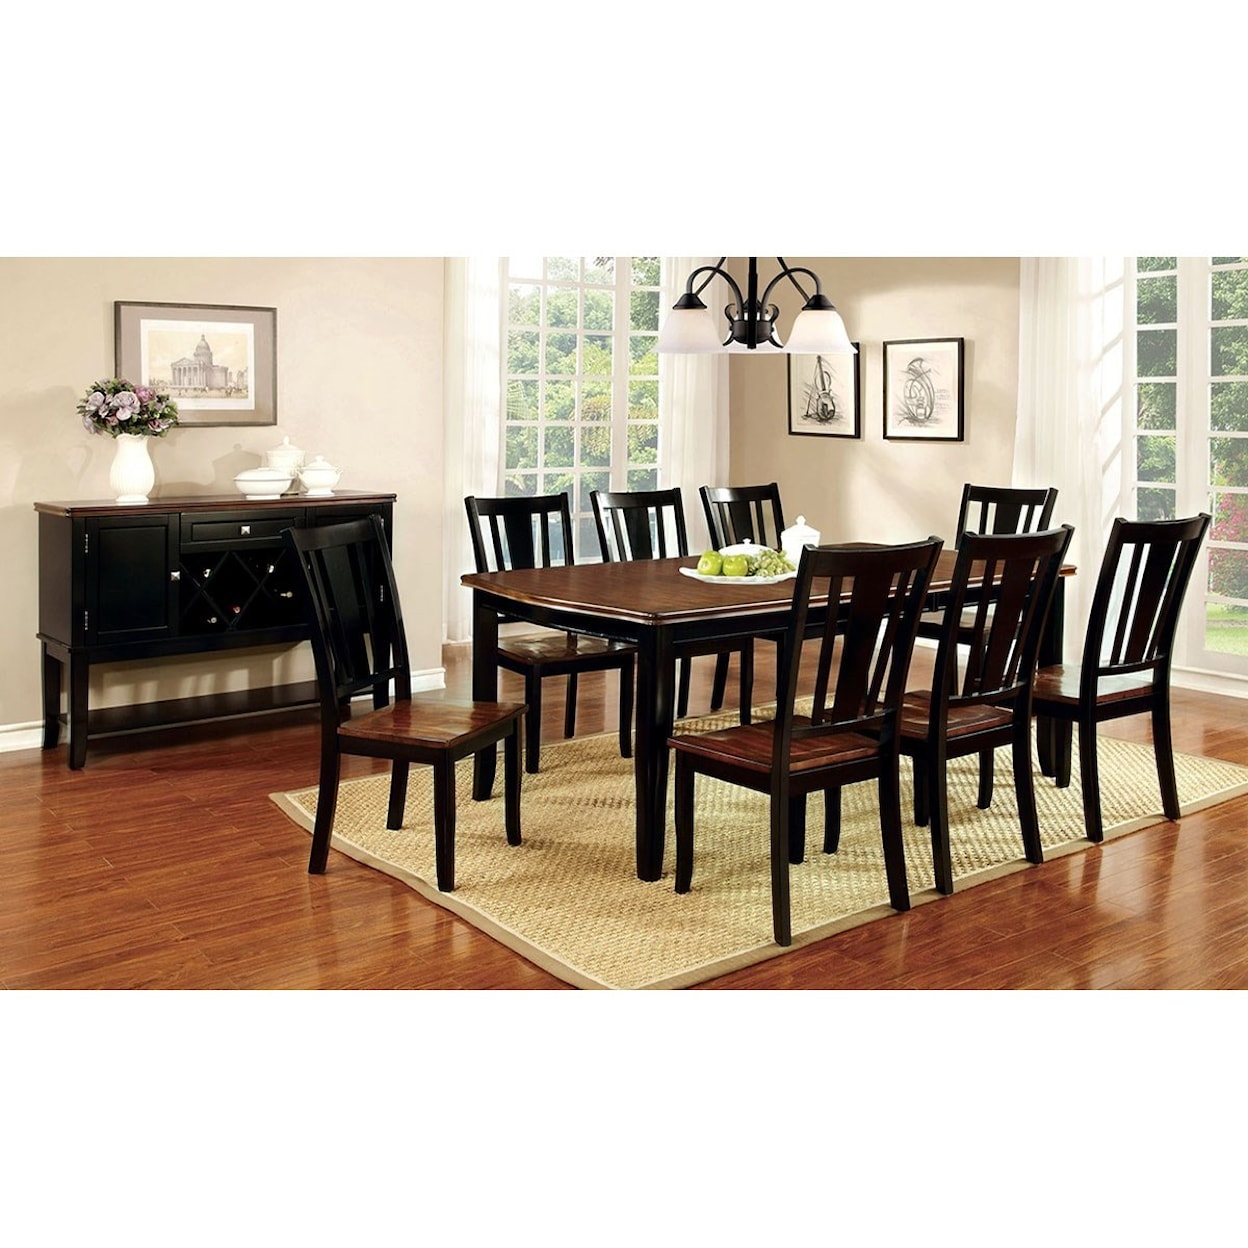 Furniture of America Dover II Table + 6 Side Chairs